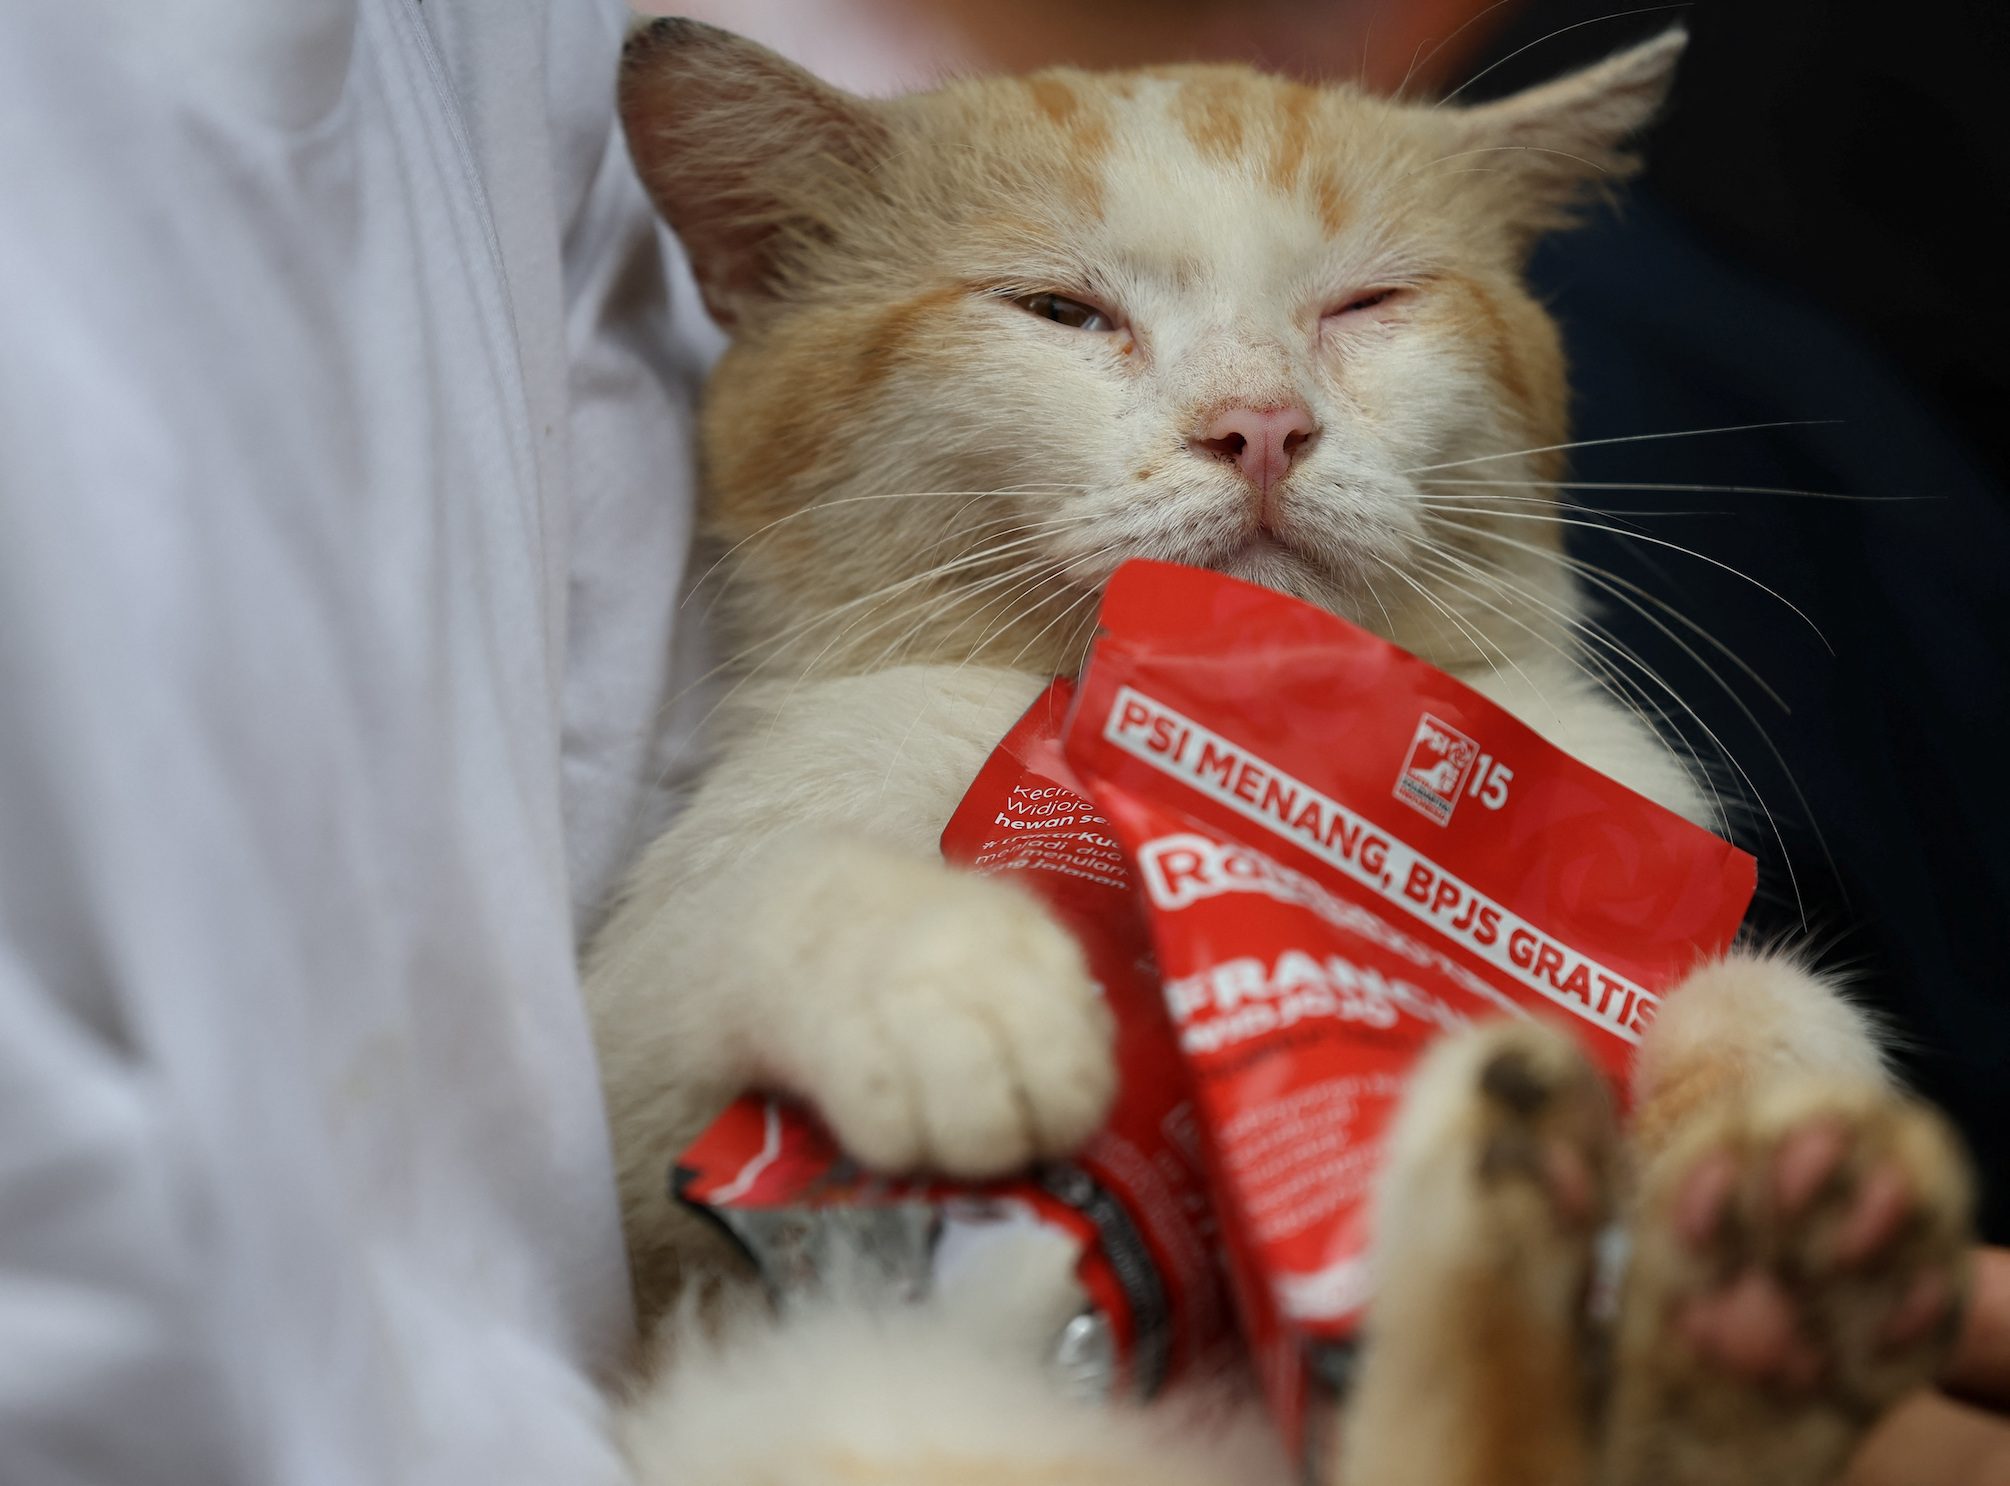 Cat lover campaigns for animal rights in Indonesia elections